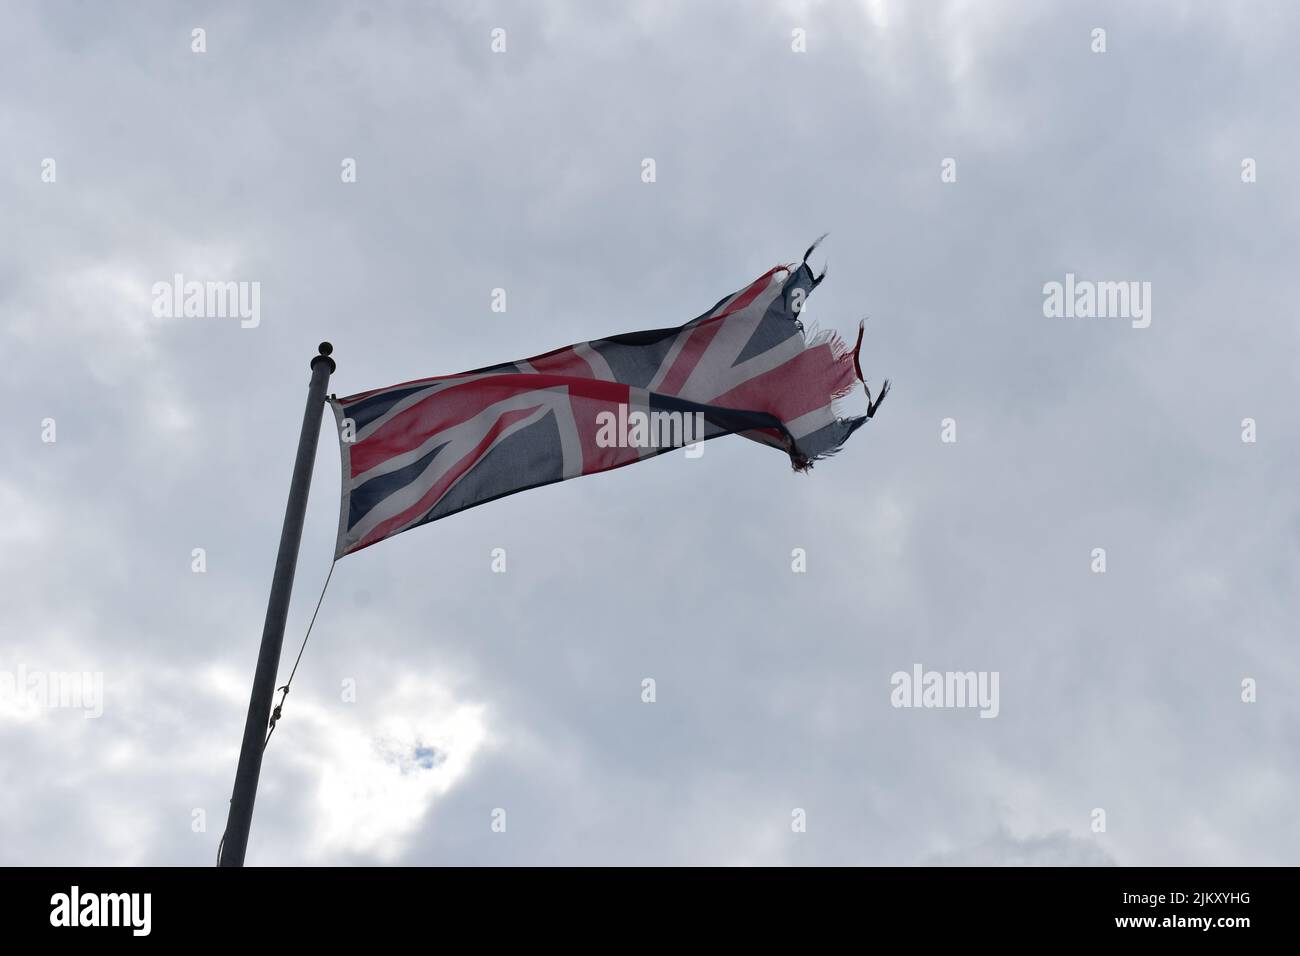 A tattered Union Jack flag against a cloudy sky. Stock Photo